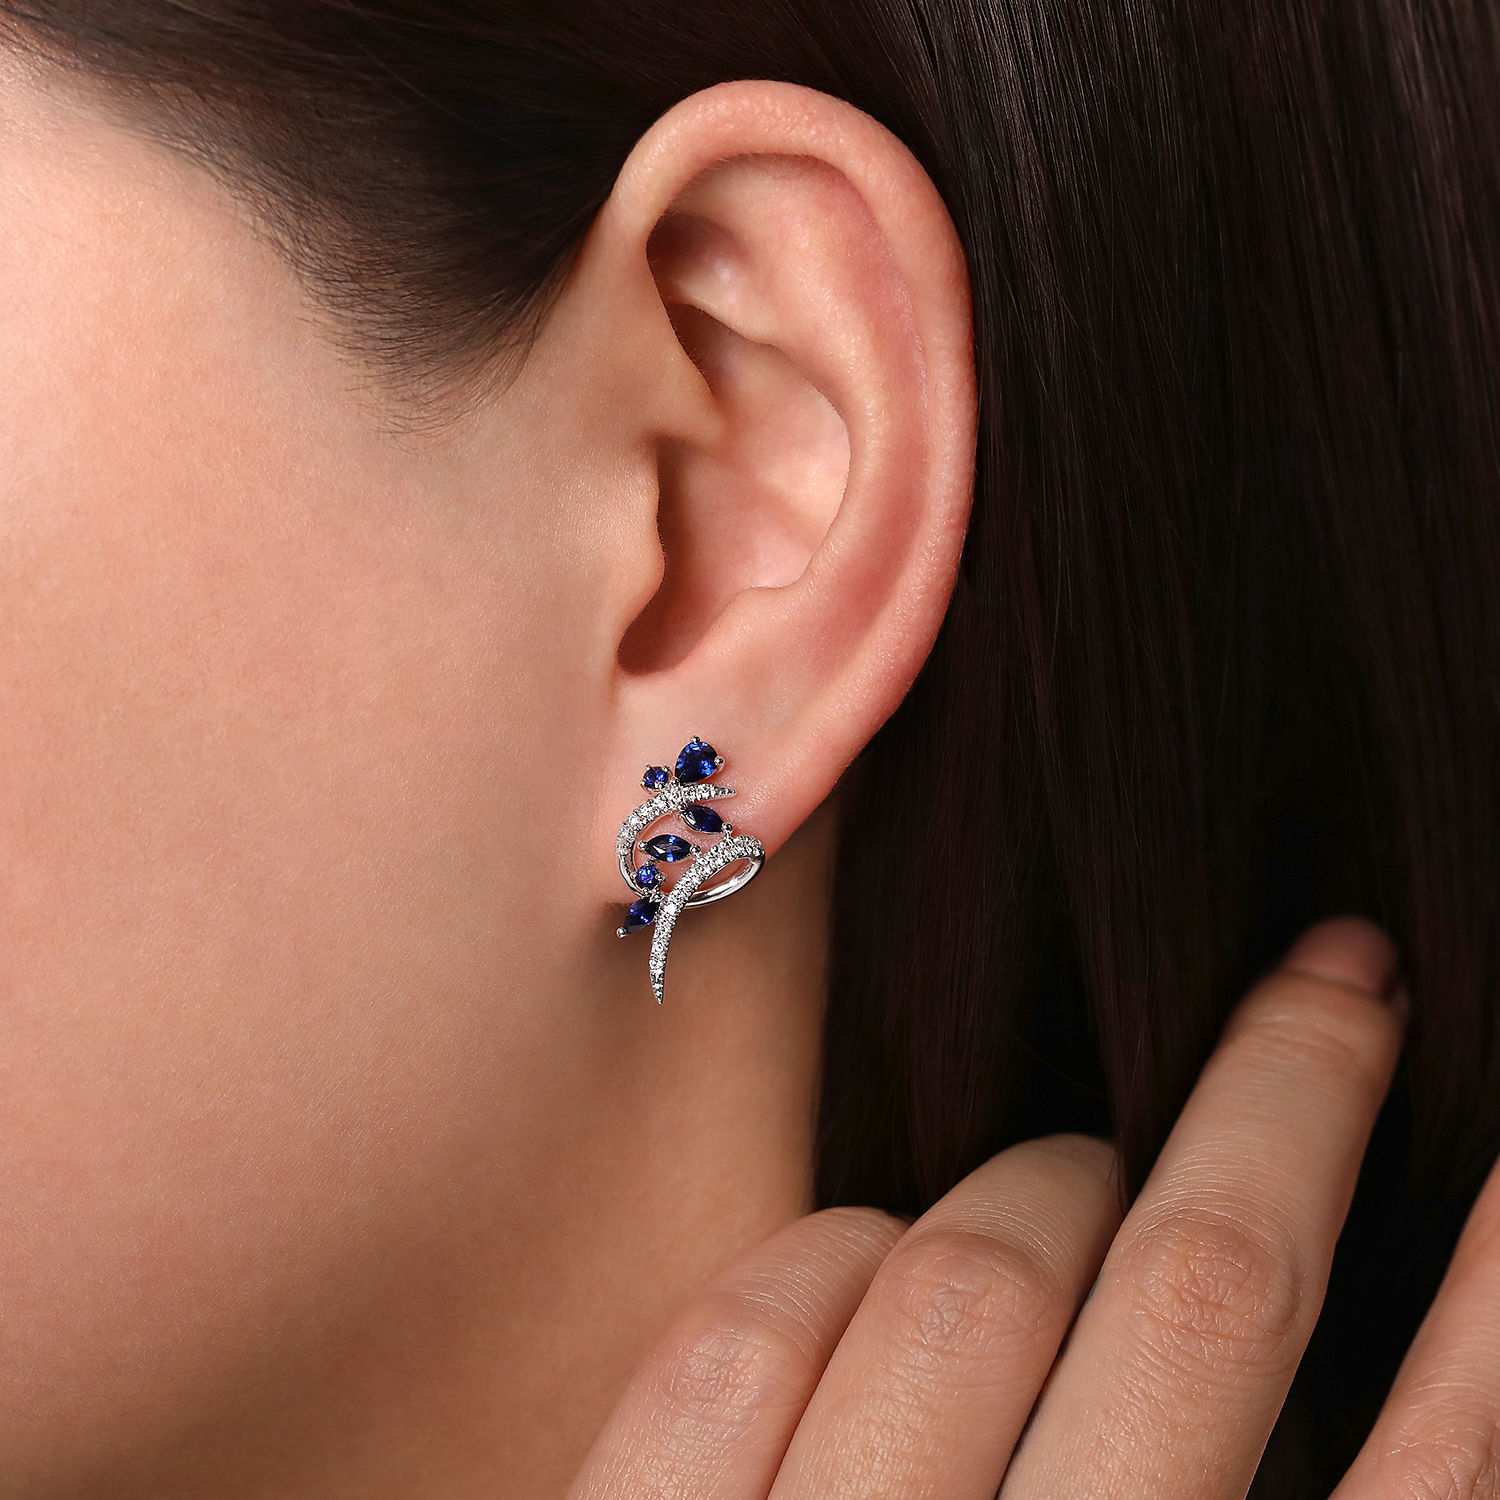 14K White Gold Twisted Abstract Sapphire and Diamond Stud Earrings